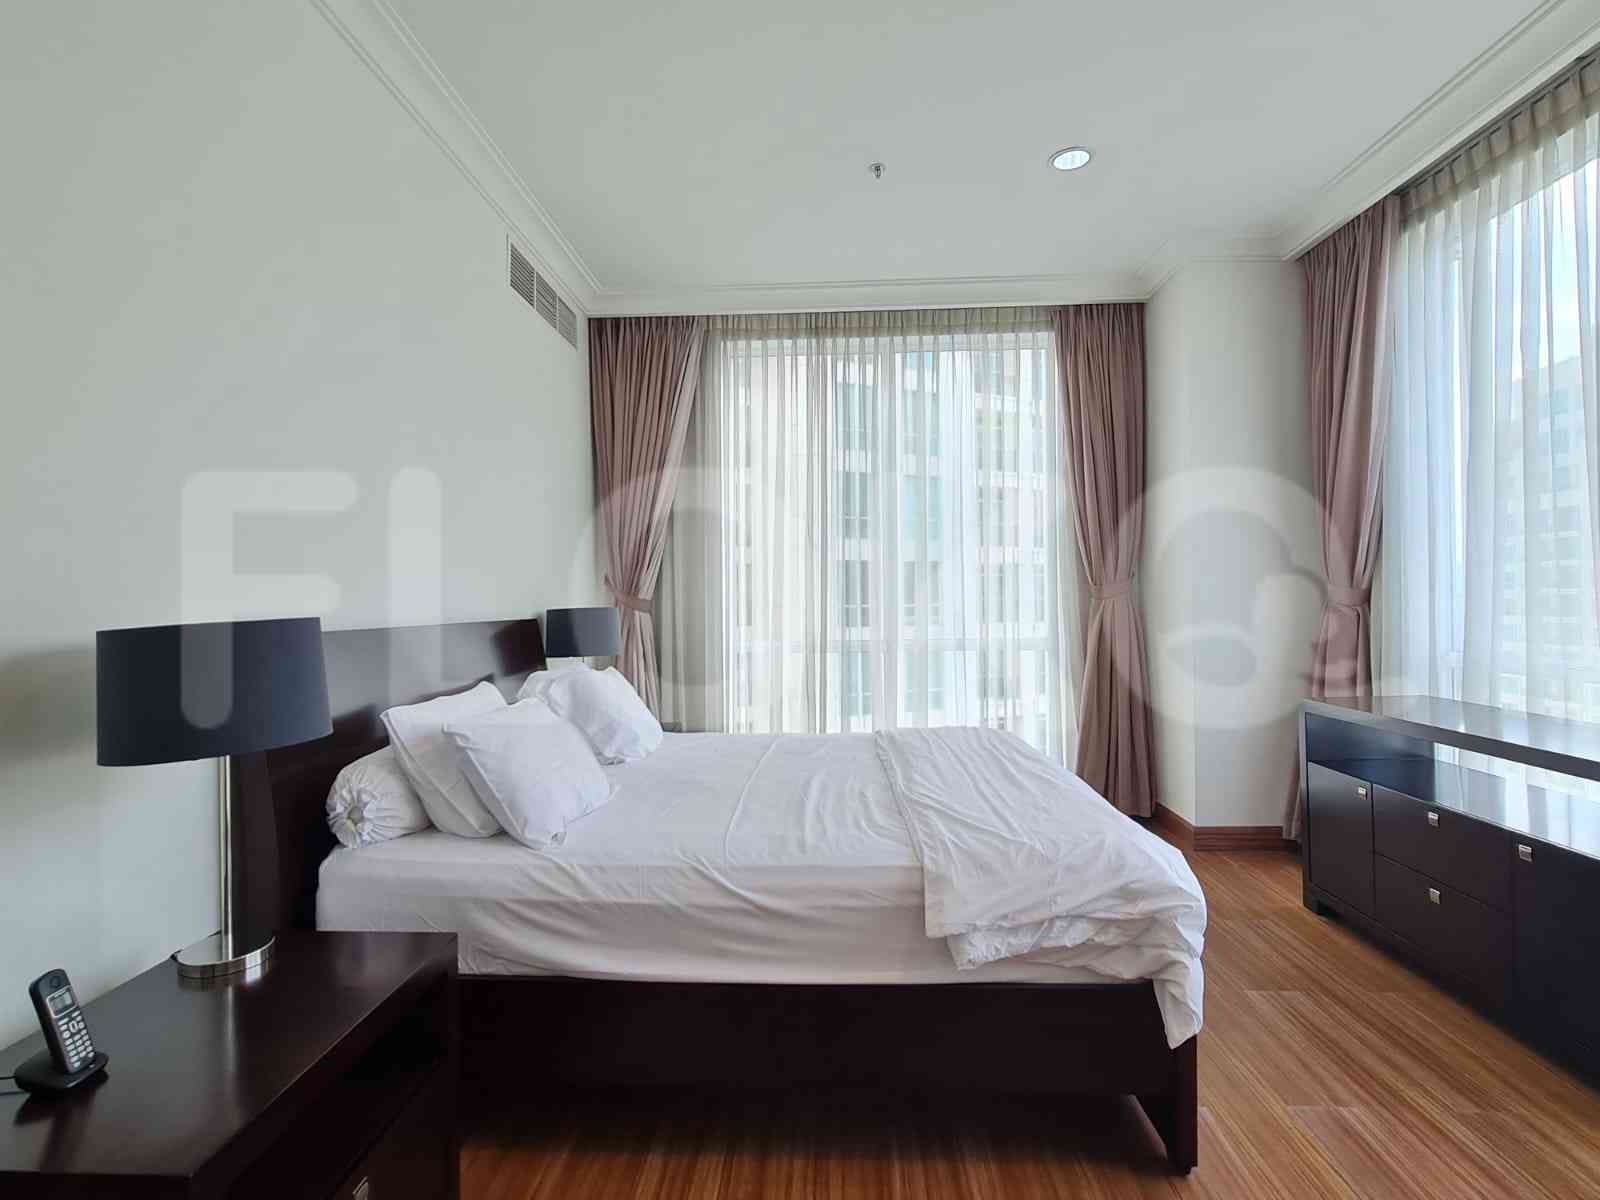 3 Bedroom on 23rd Floor for Rent in Pakubuwono View - fga8fc 5